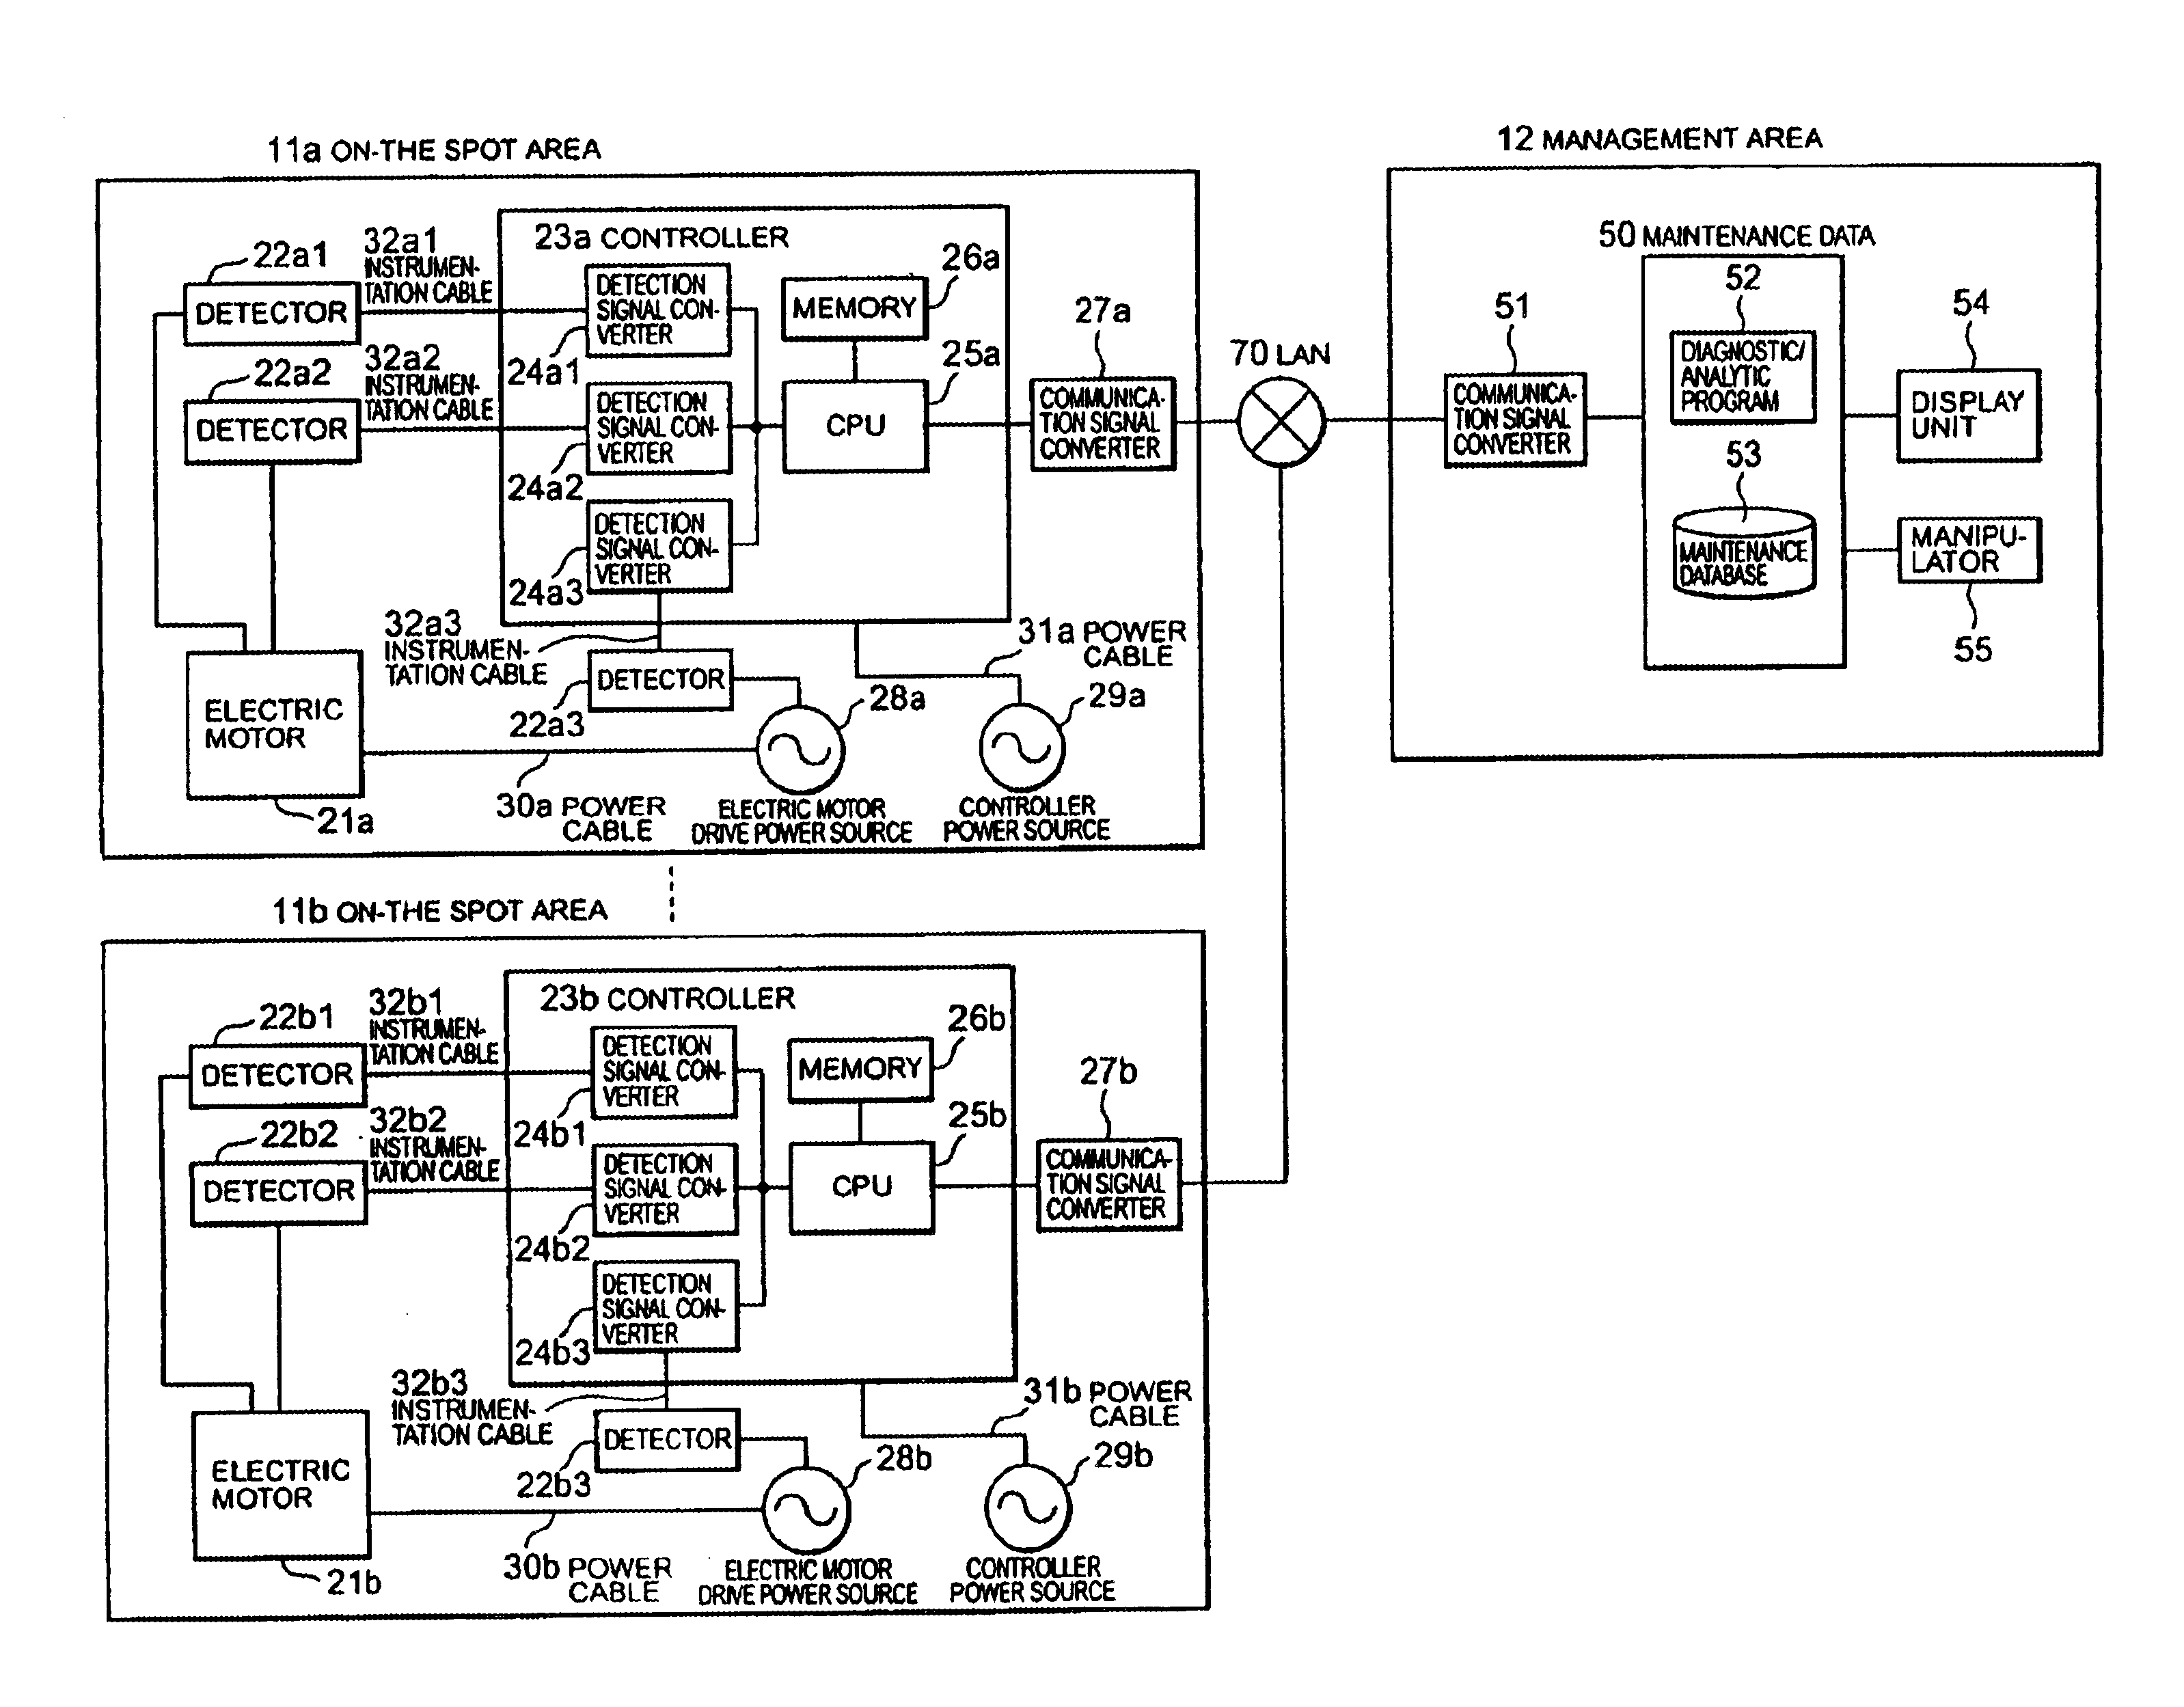 State-of-device remote monitoring system